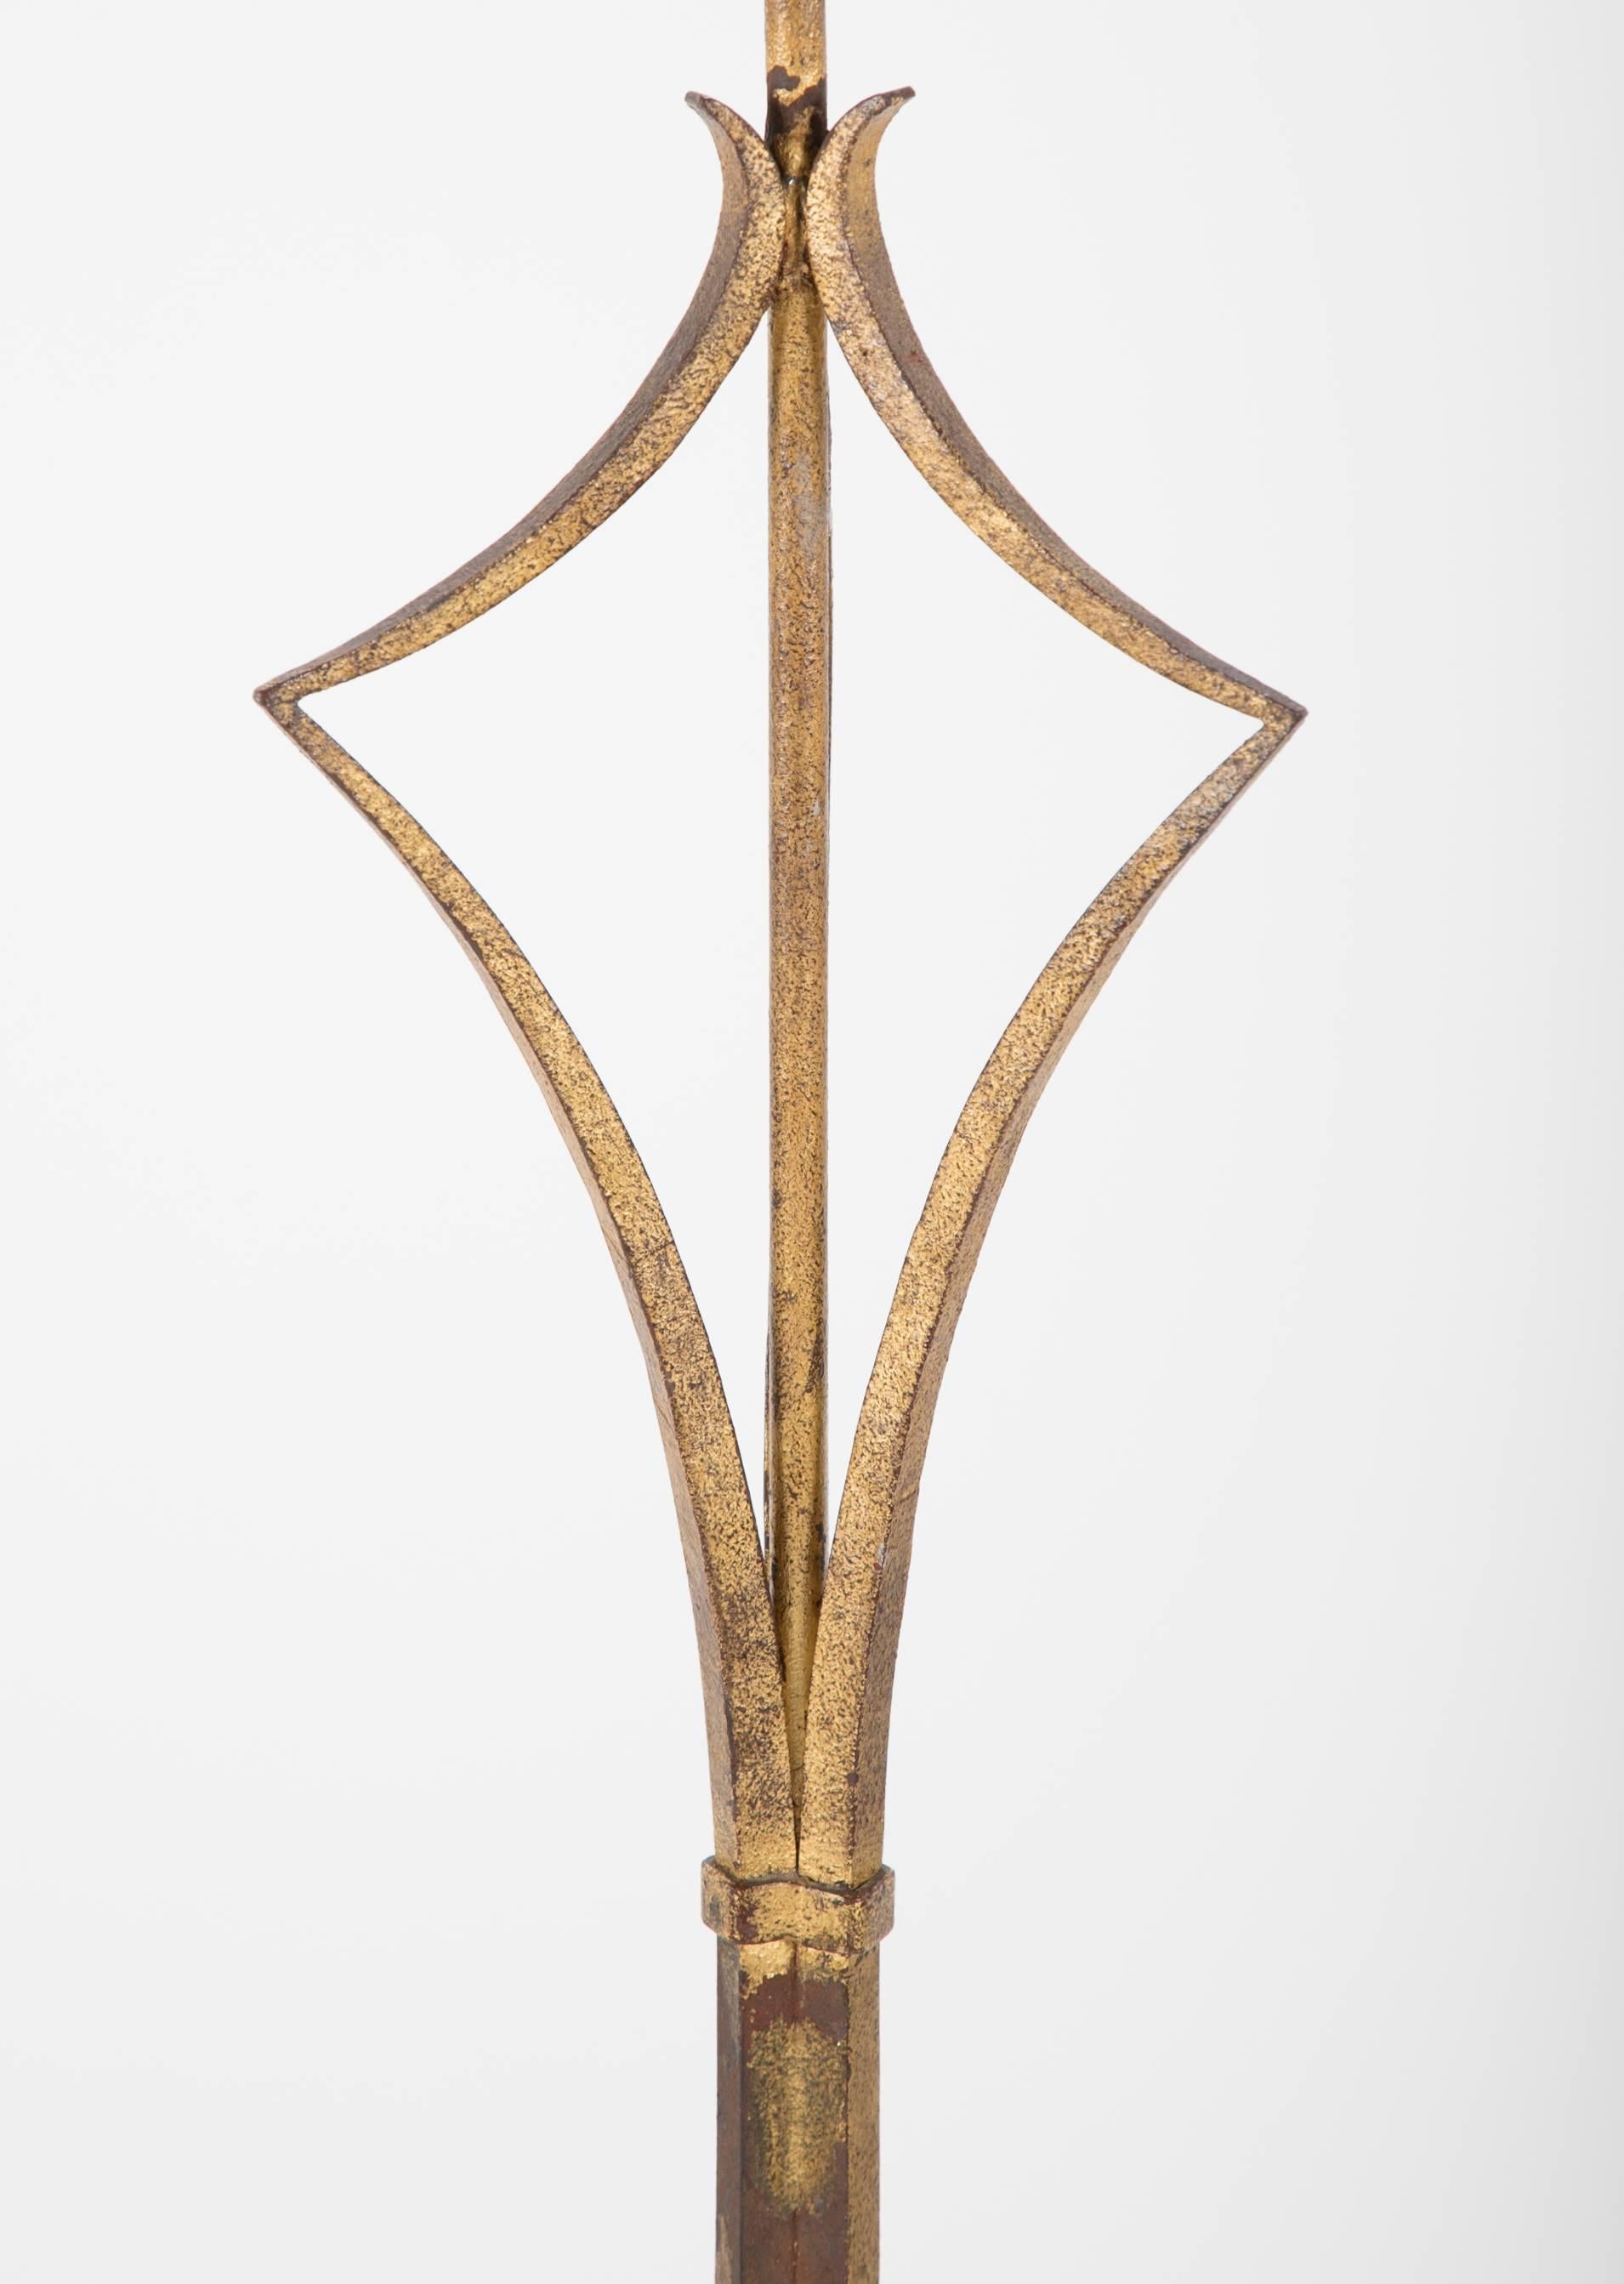 Elegant French gilt wrought iron, the tripod base with ball feet supporting. Beautiful and sophisticated construction of three bound iron rods that open to a delicate triangle at the top.